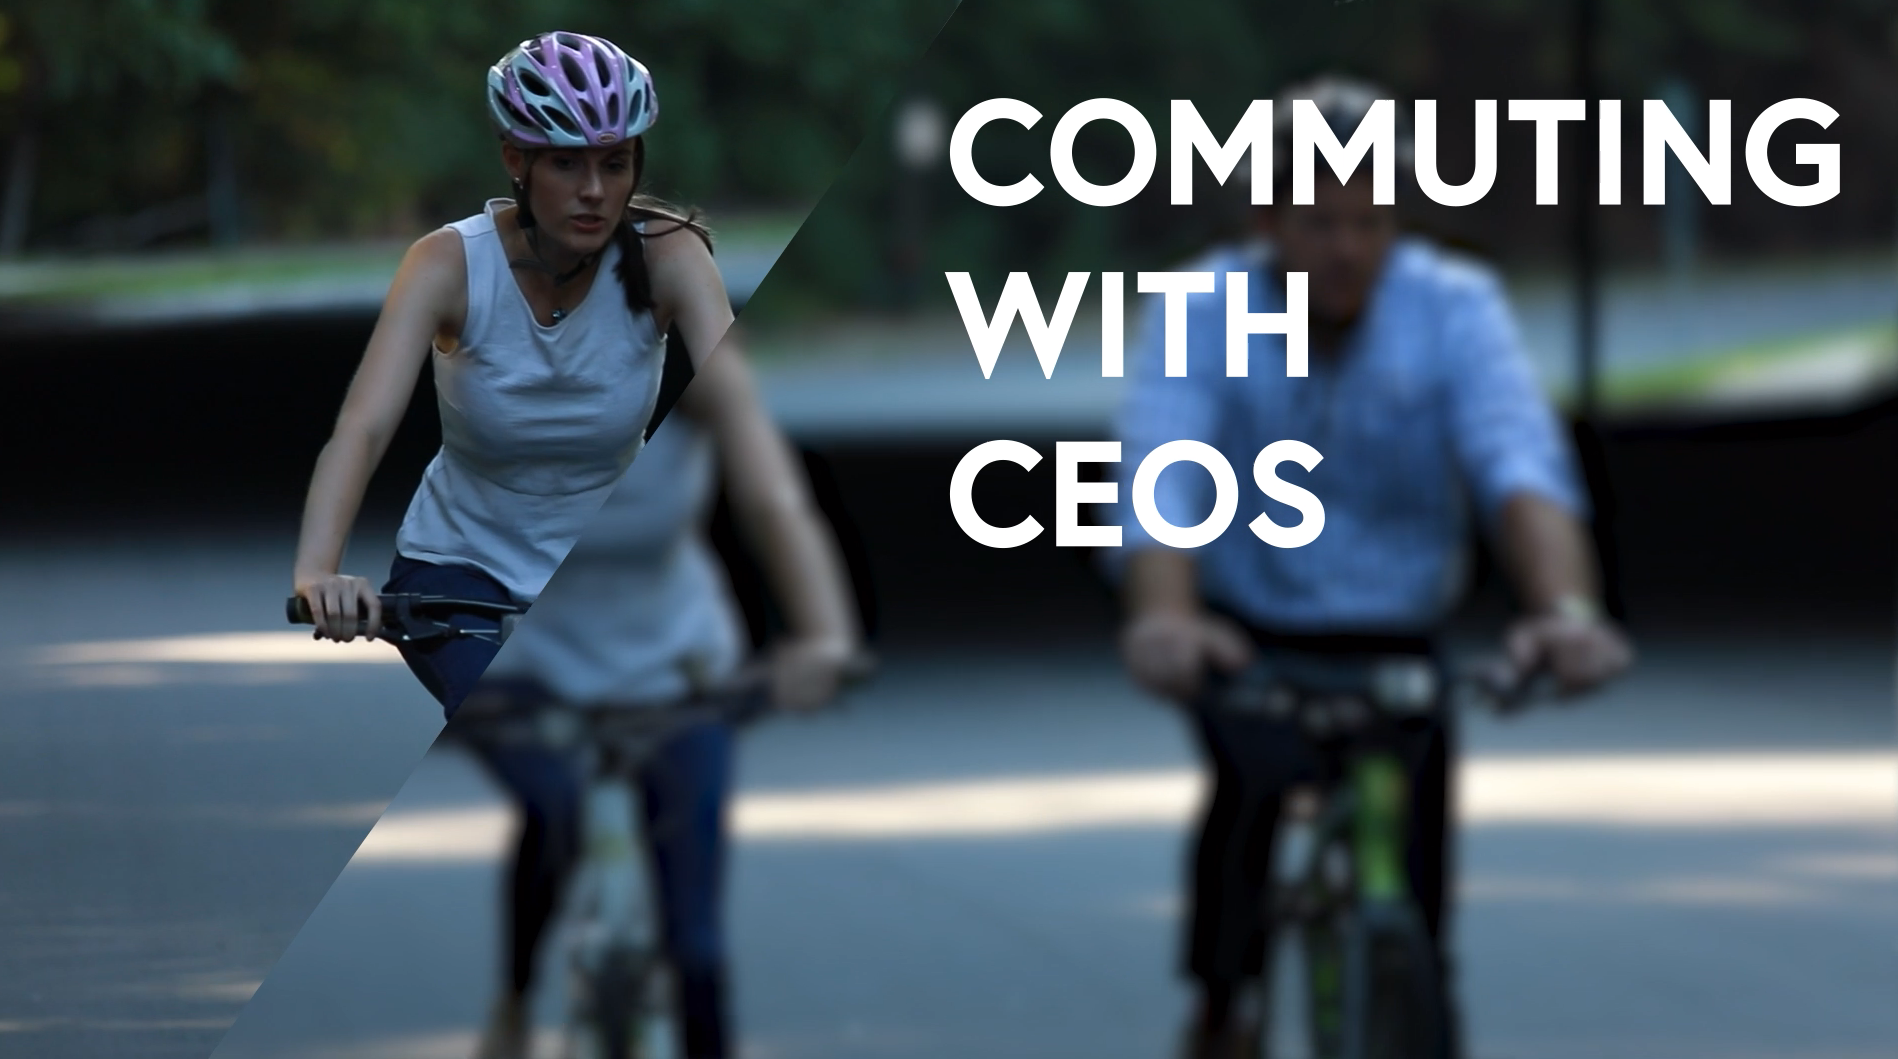 Commuting with CEOs